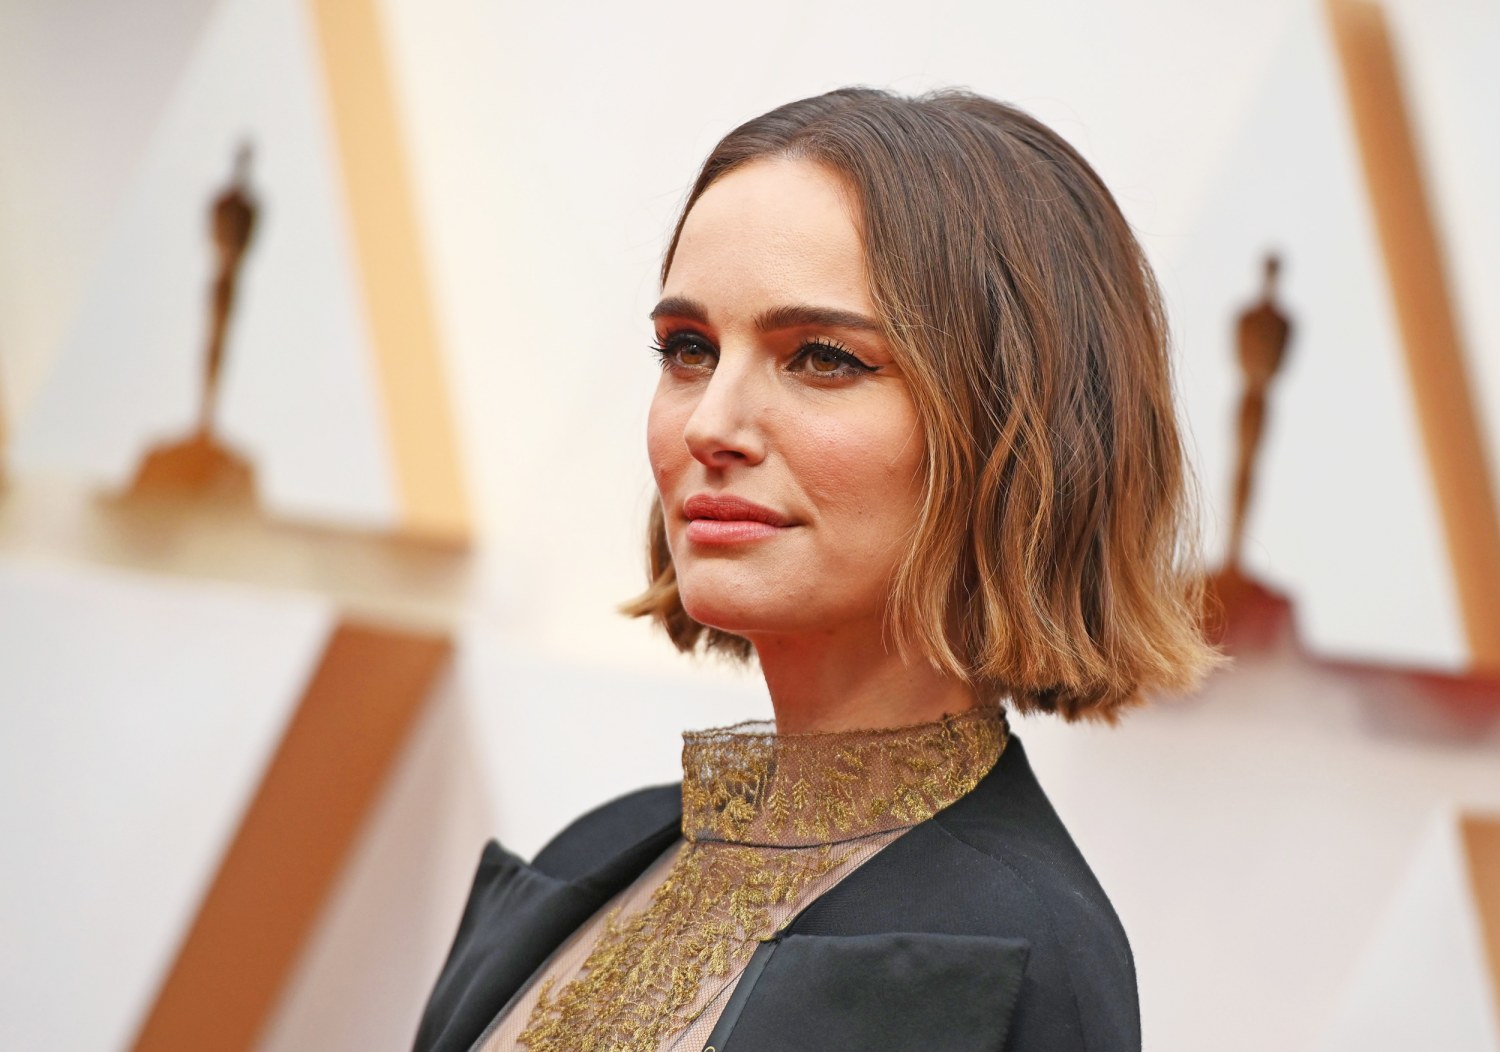 Natalie Portman says that sexualized roles as a teen harmed her. When will  Hollywood listen?